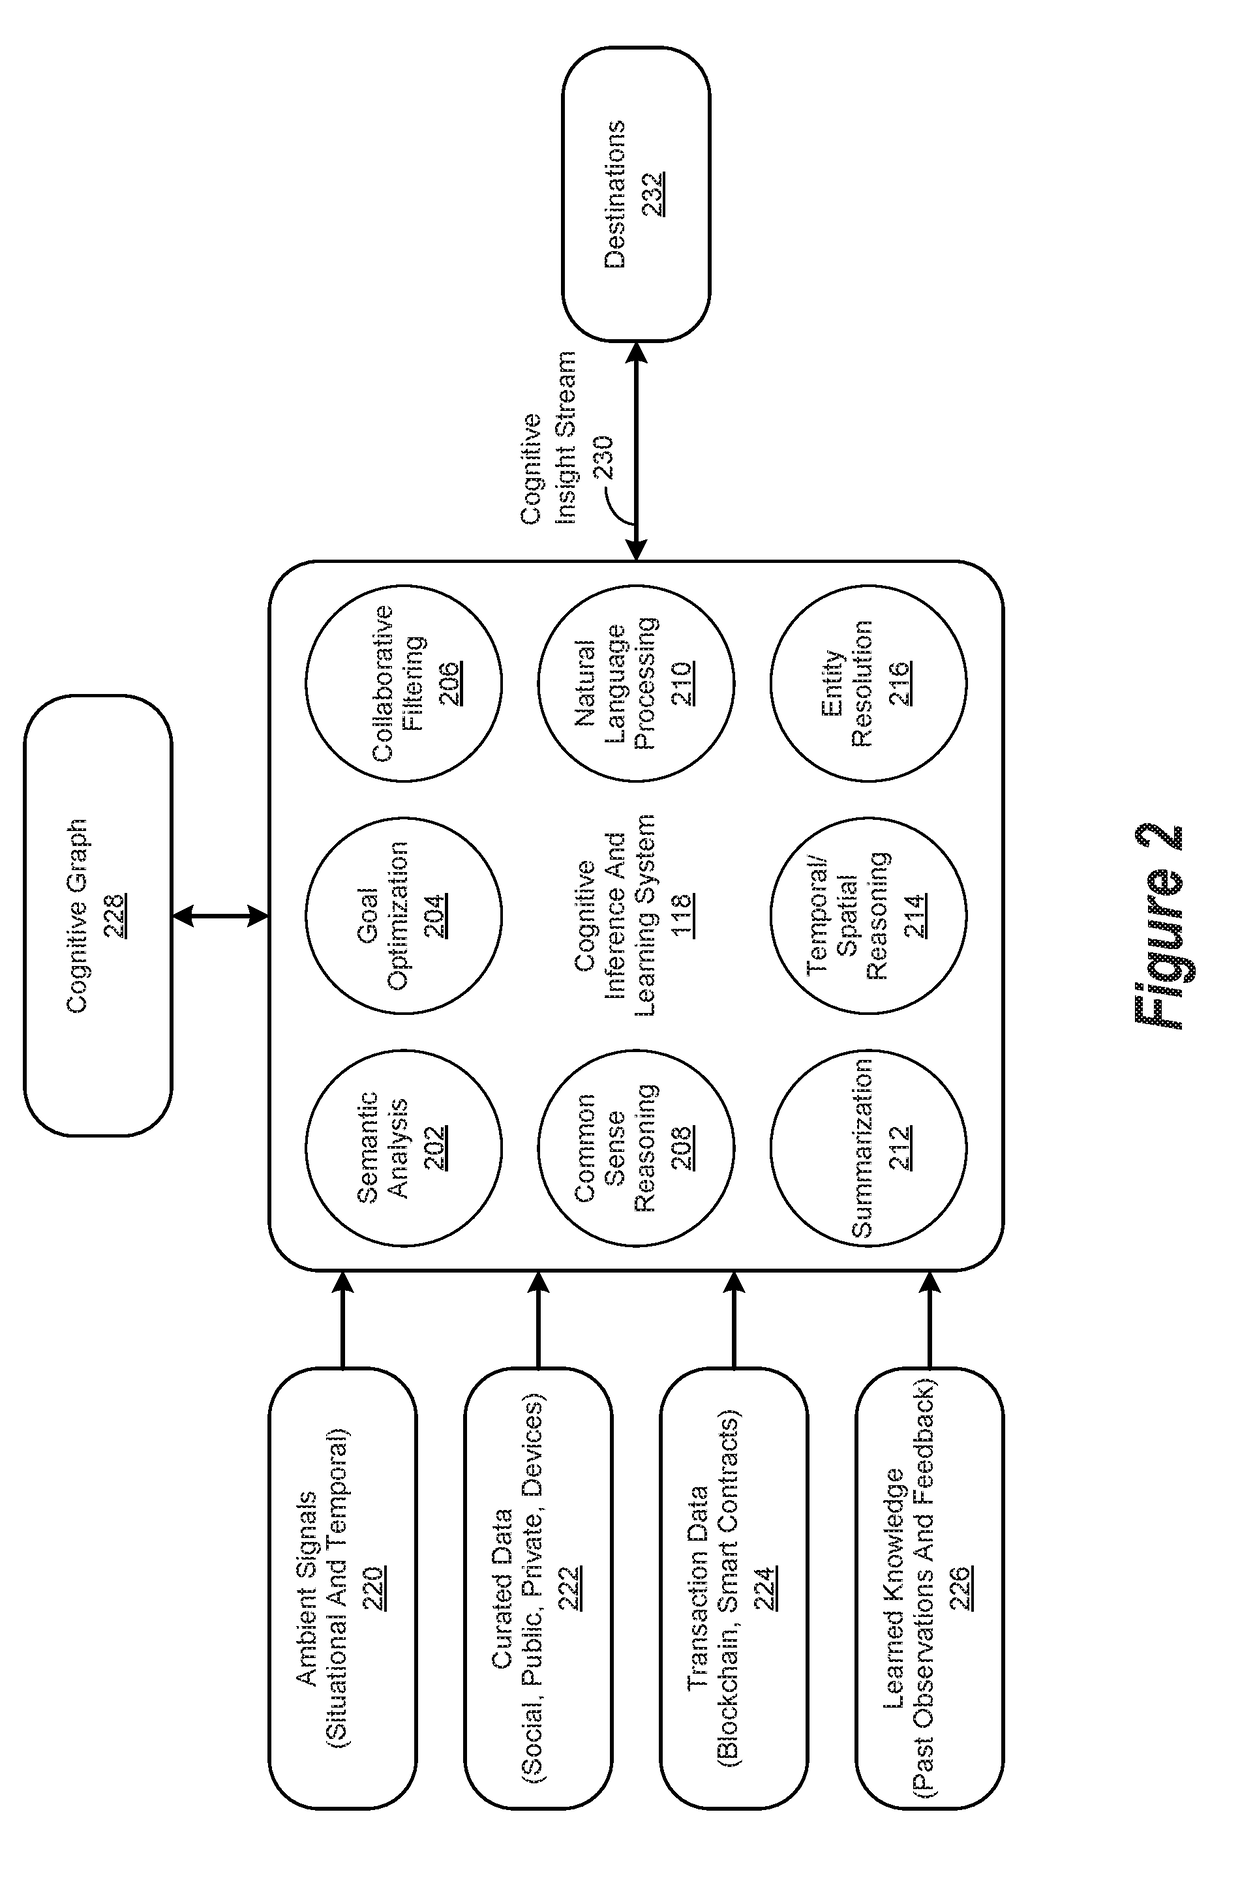 Method for Using Hybrid Blockchain Data Architecture Within a Cognitive Environment